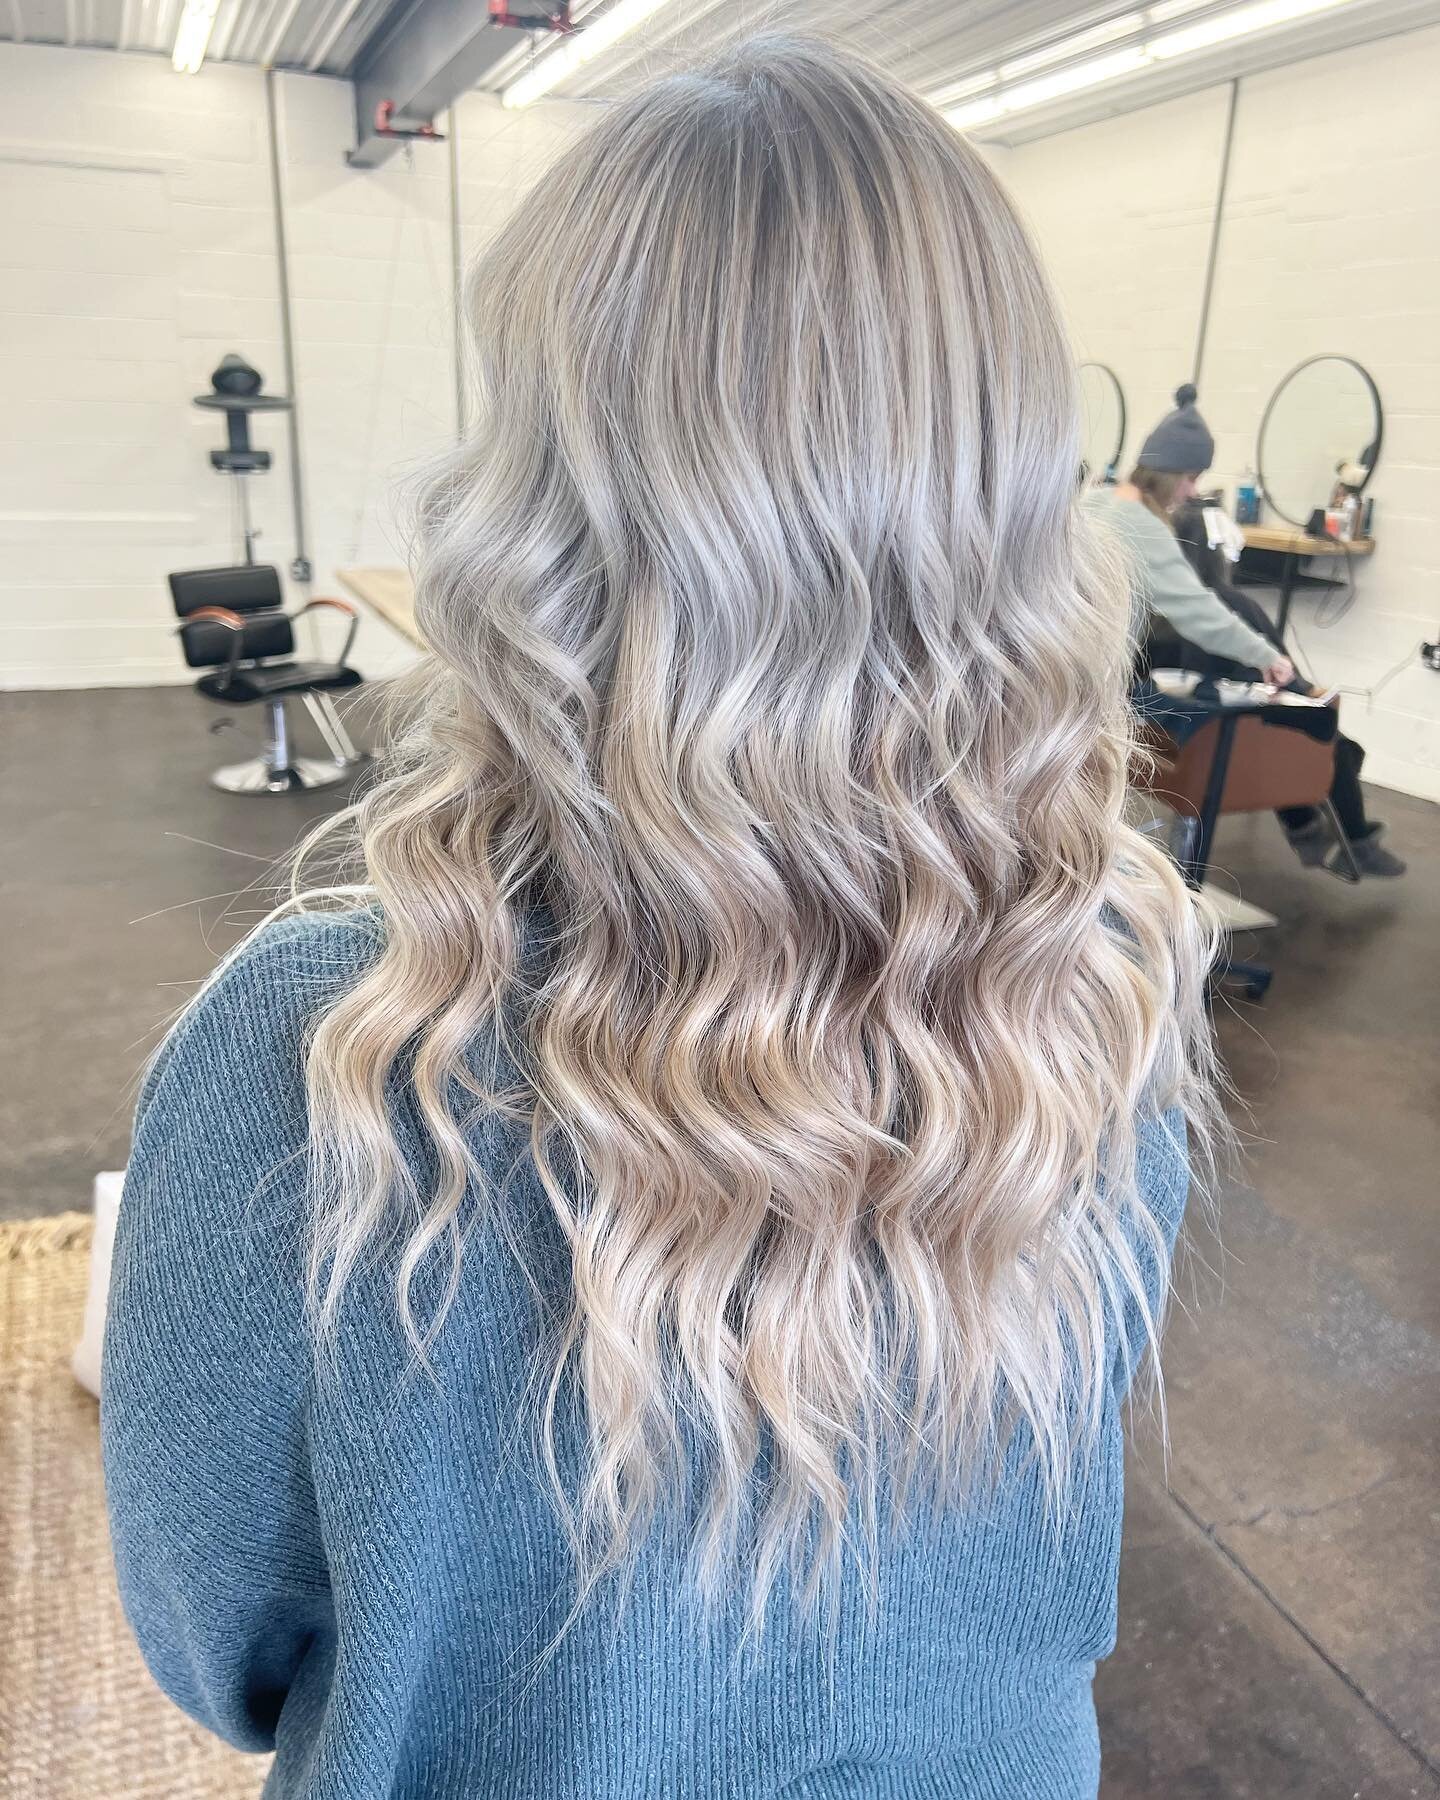 Bam 💥 Pow! 

Color by @heatherschair 
Extension install by @hairbylarissa_h 

#wella #blondor #icyblonde #beigyblonde #hilights #halocoture #halocoutureextensions #bumbleandbumble #hhouseofhair